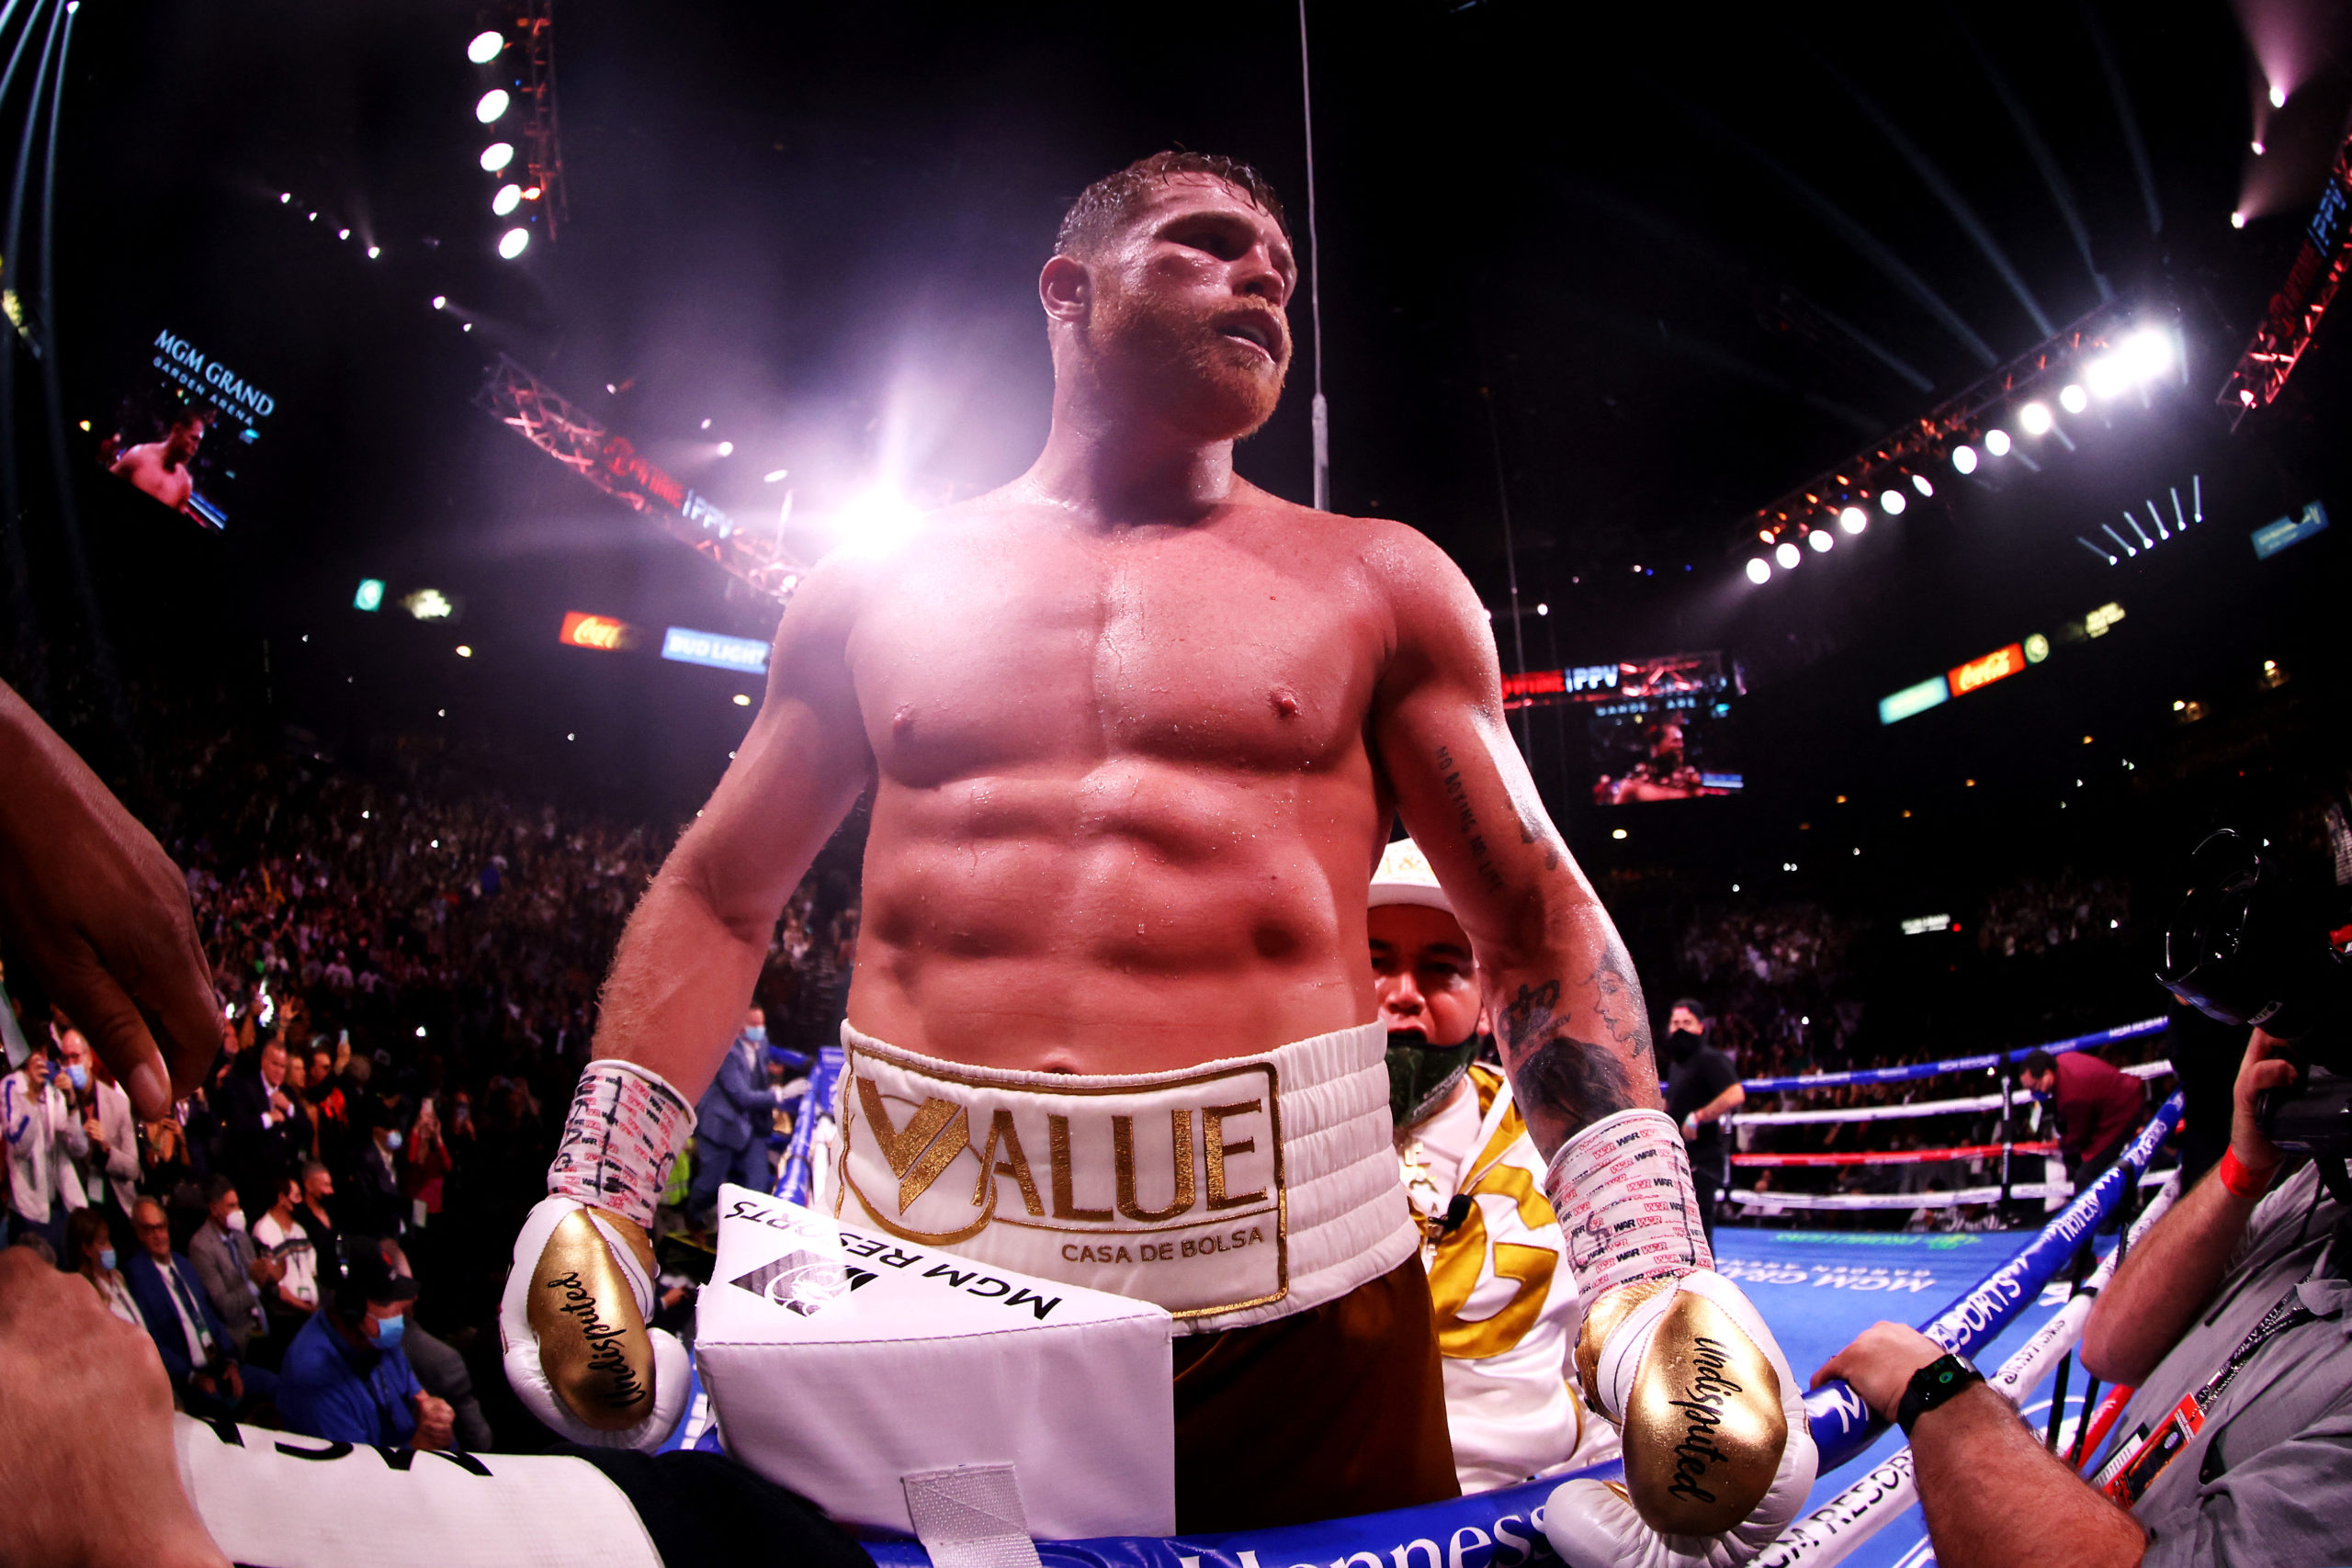  Canelo Alvarez celebrates his 11th round technical knock out win against Caleb Plant after their championship bout for Alvarez's WBC, WBO and WBA super middleweight titles and Plant's IBF super middleweight title at MGM Grand Garden Arena on November 06, 2021 in Las Vegas, Nevada.   